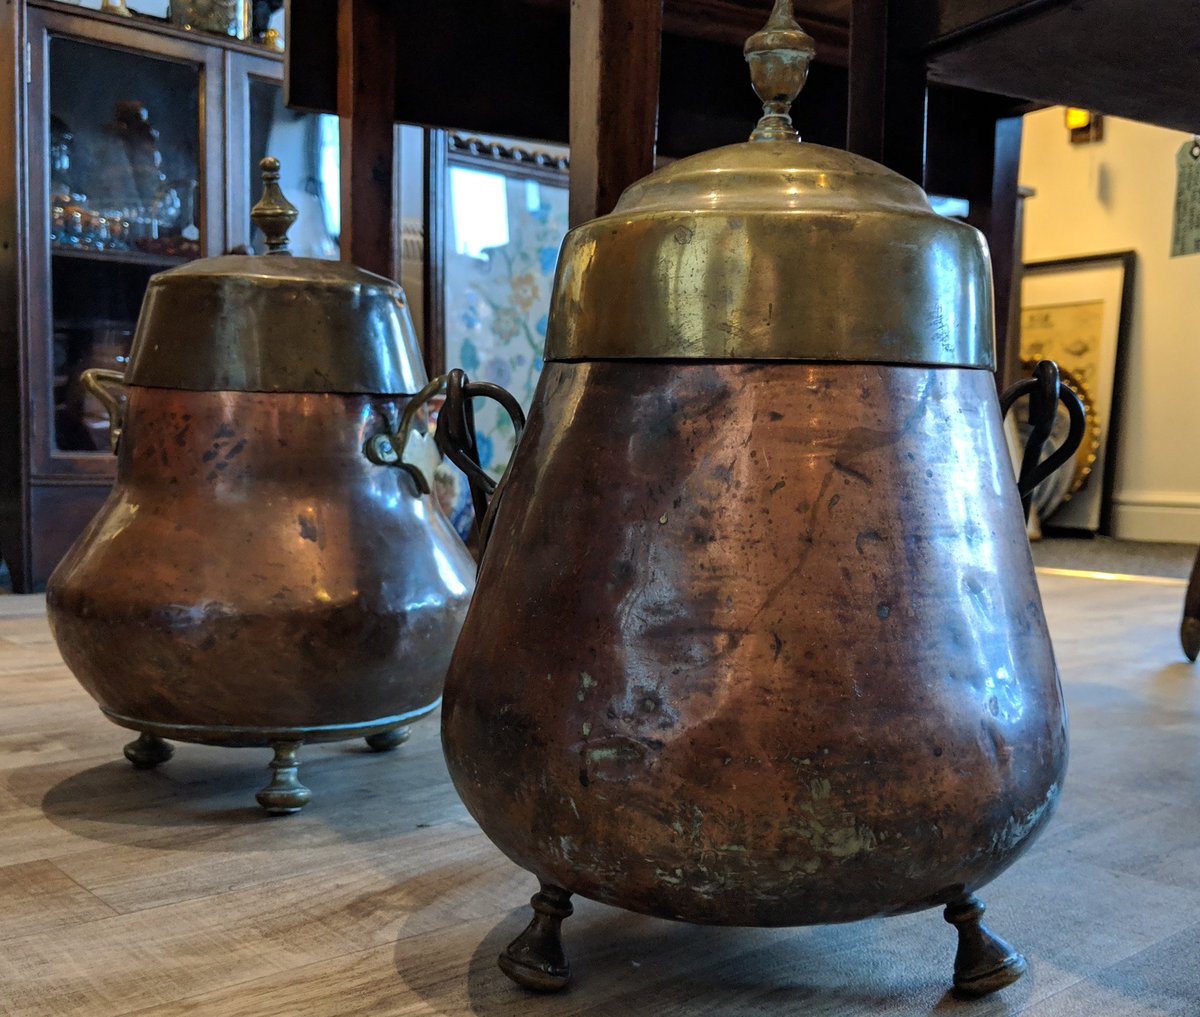 Two large #antique #dutch Doofpots,  Ash Buckets - room warmers, #Victorian  attractive pot bellied shape, new in #freshstock available today #antiques #antiquesshop #homestyle #vintagestyle #homedesign #coalfire #blyton #theoldgrainstore #gainsborough